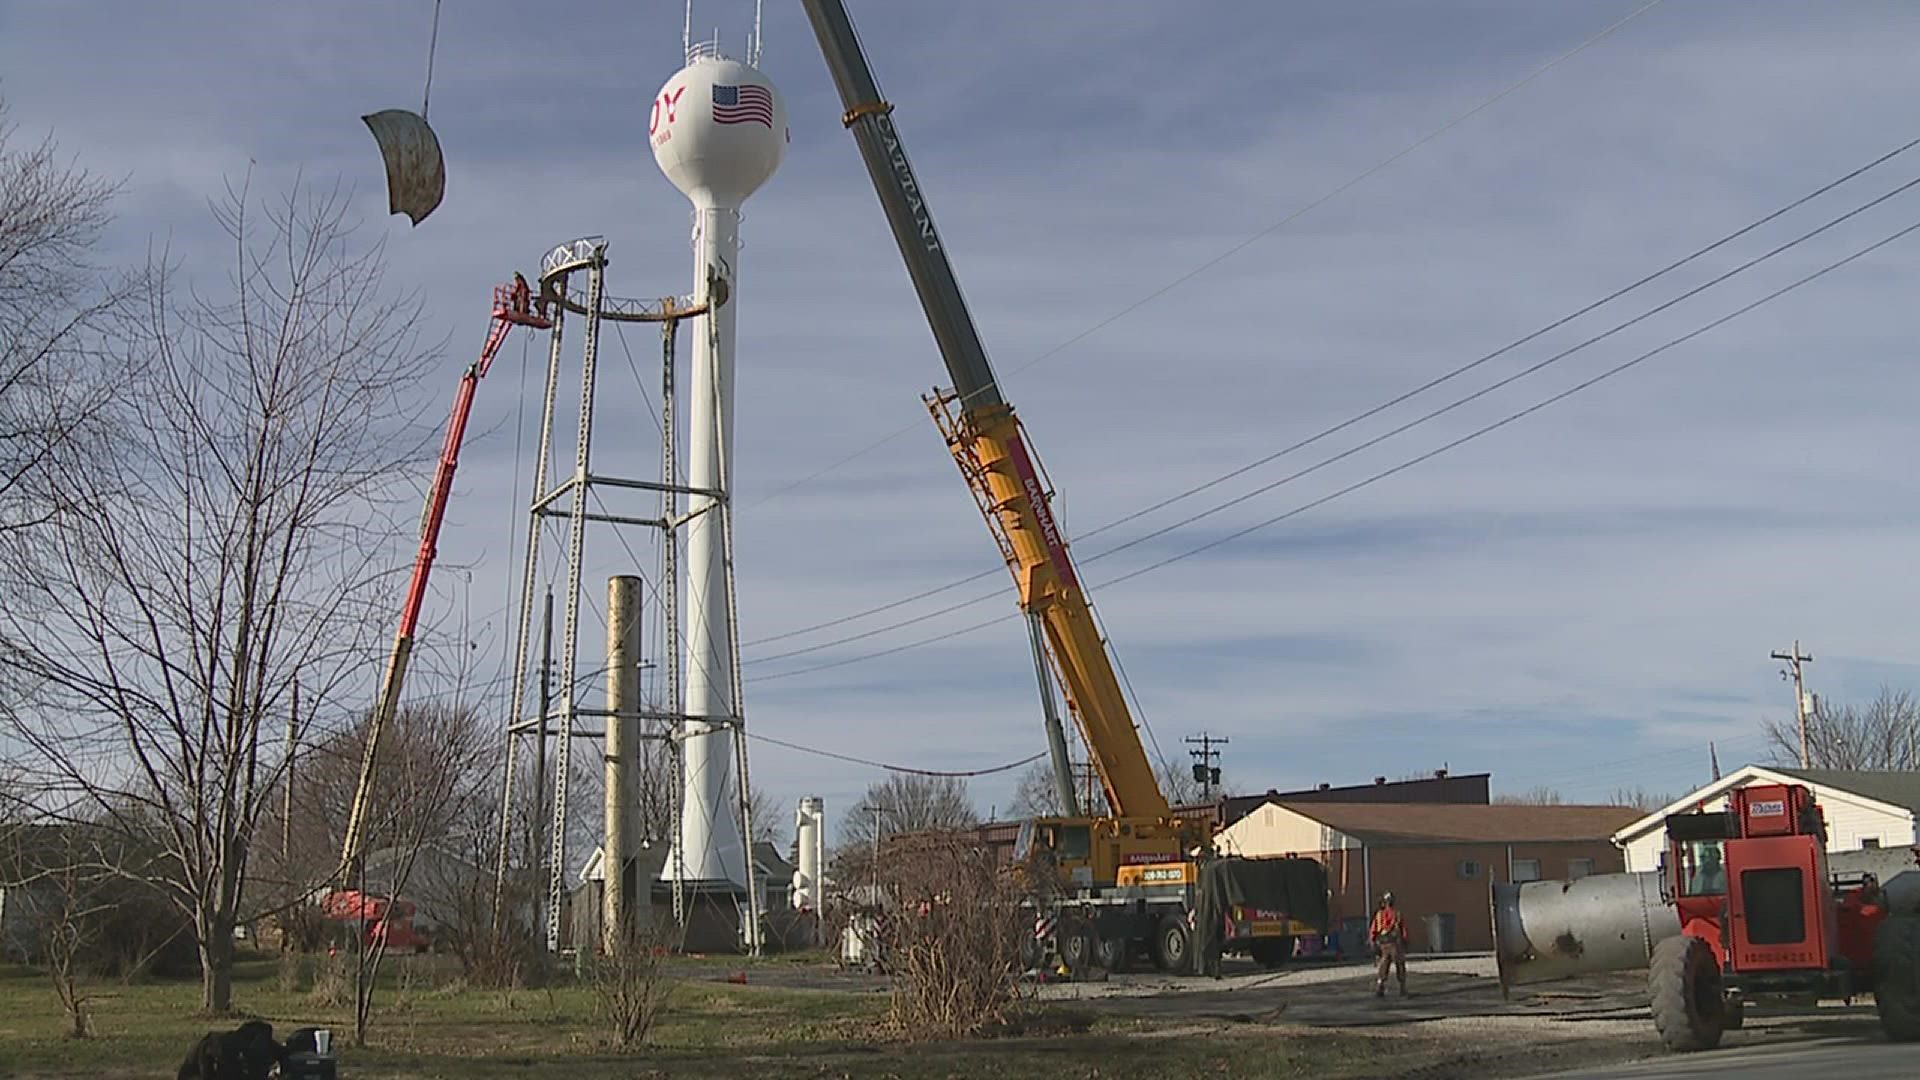 The village now has a new water tower, water mains and a filtration and softening system that are increasing its water pressure by almost double.